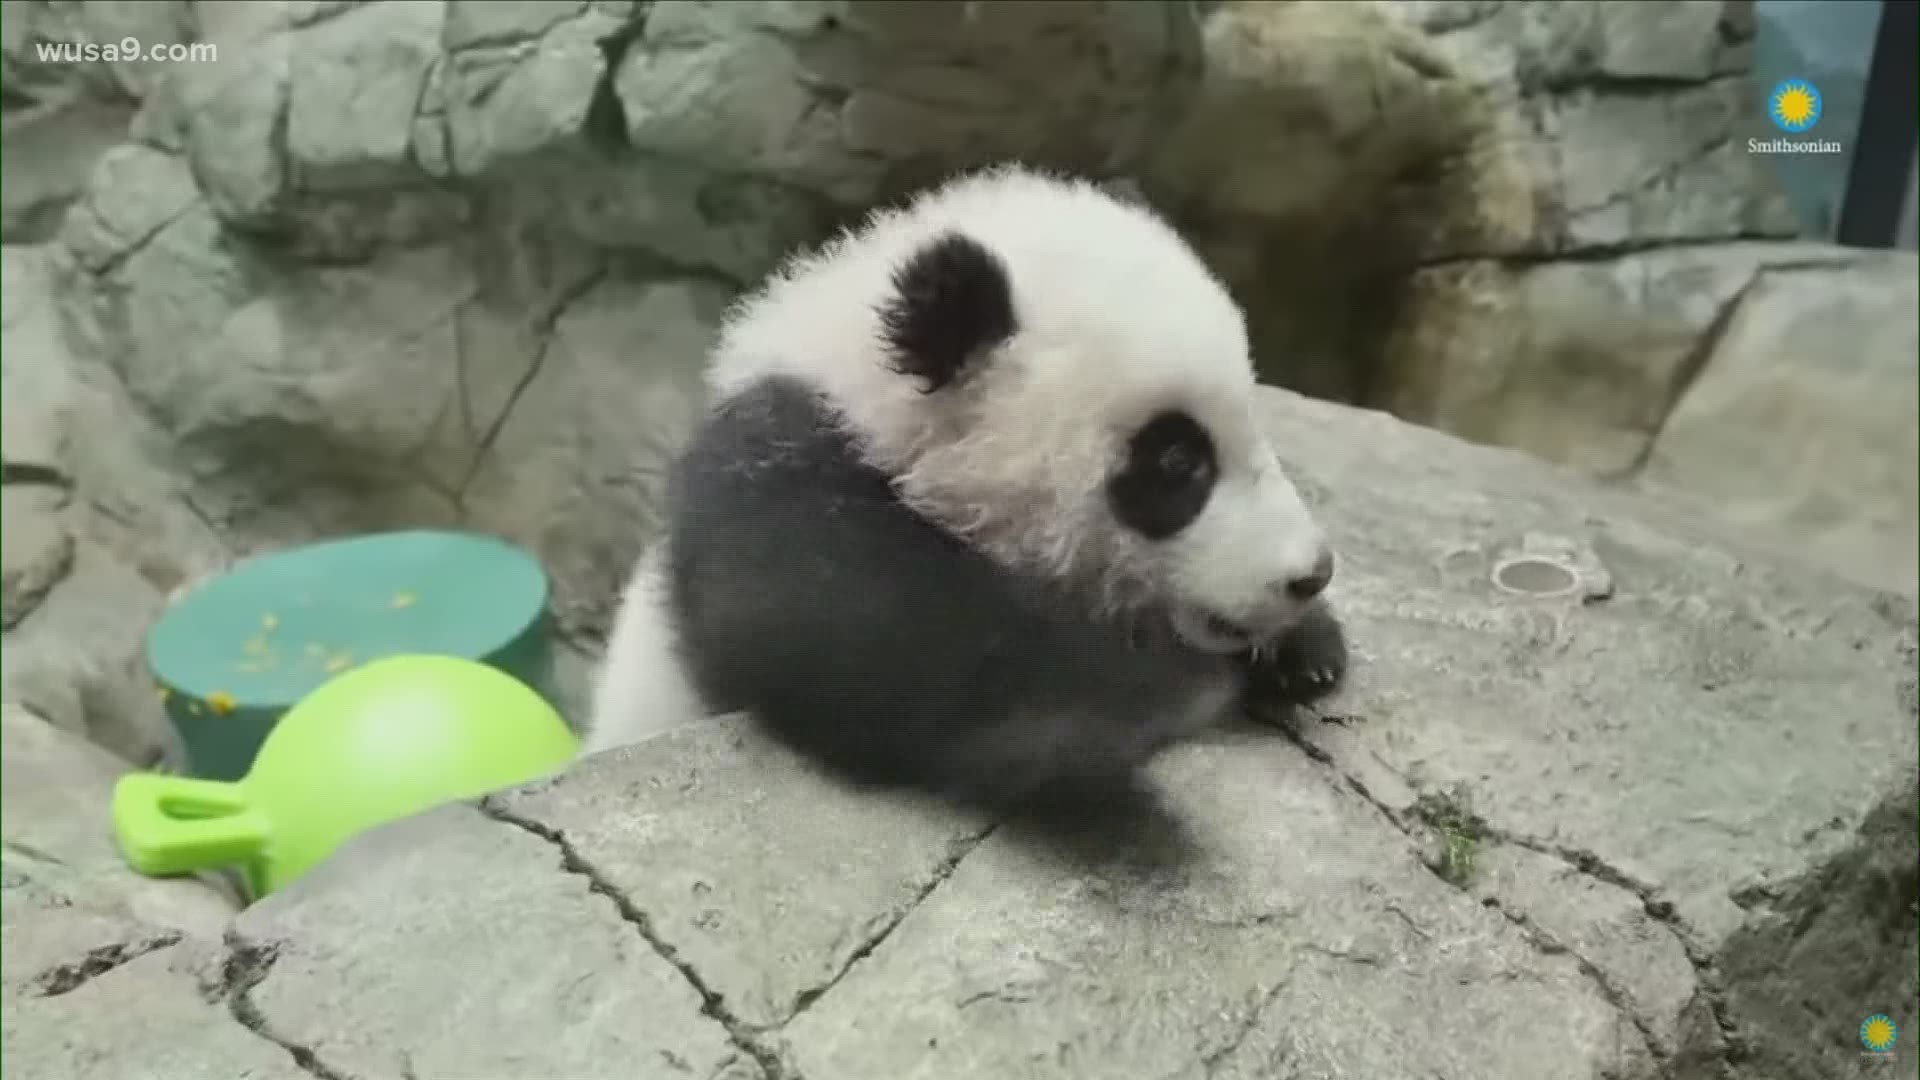 The National Zoo provides up-close, real-time look at Xiao Qi Ji as he walks, climbs, tumbles and explores his indoor habitat.